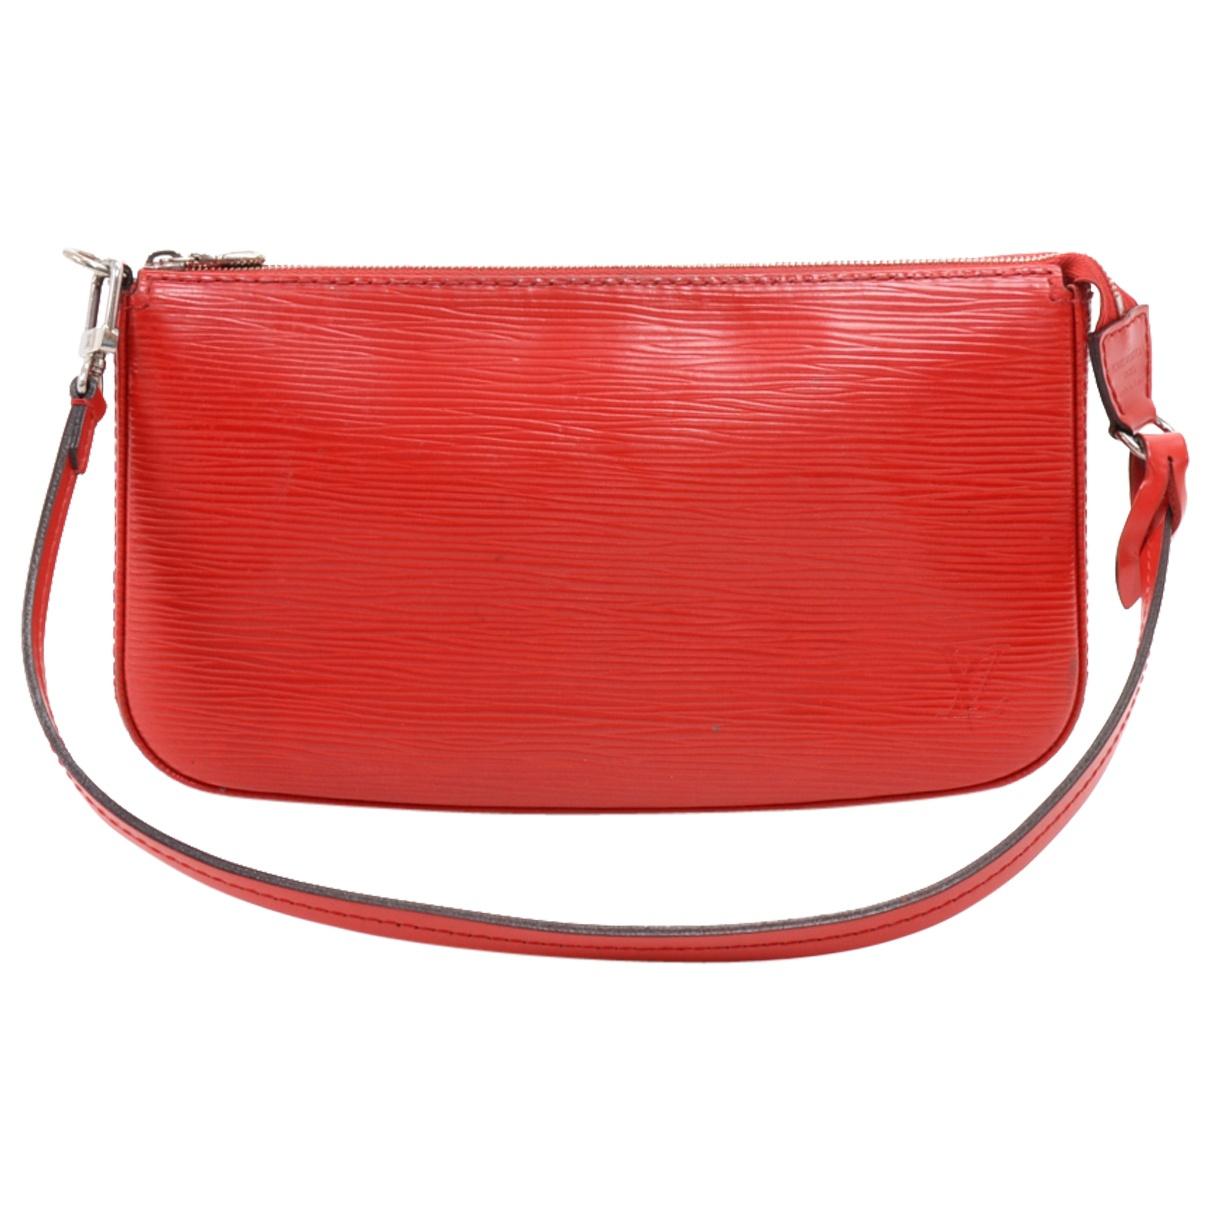 Lyst - Louis Vuitton Pochette Accessoire Red Leather Clutch Bag in Red